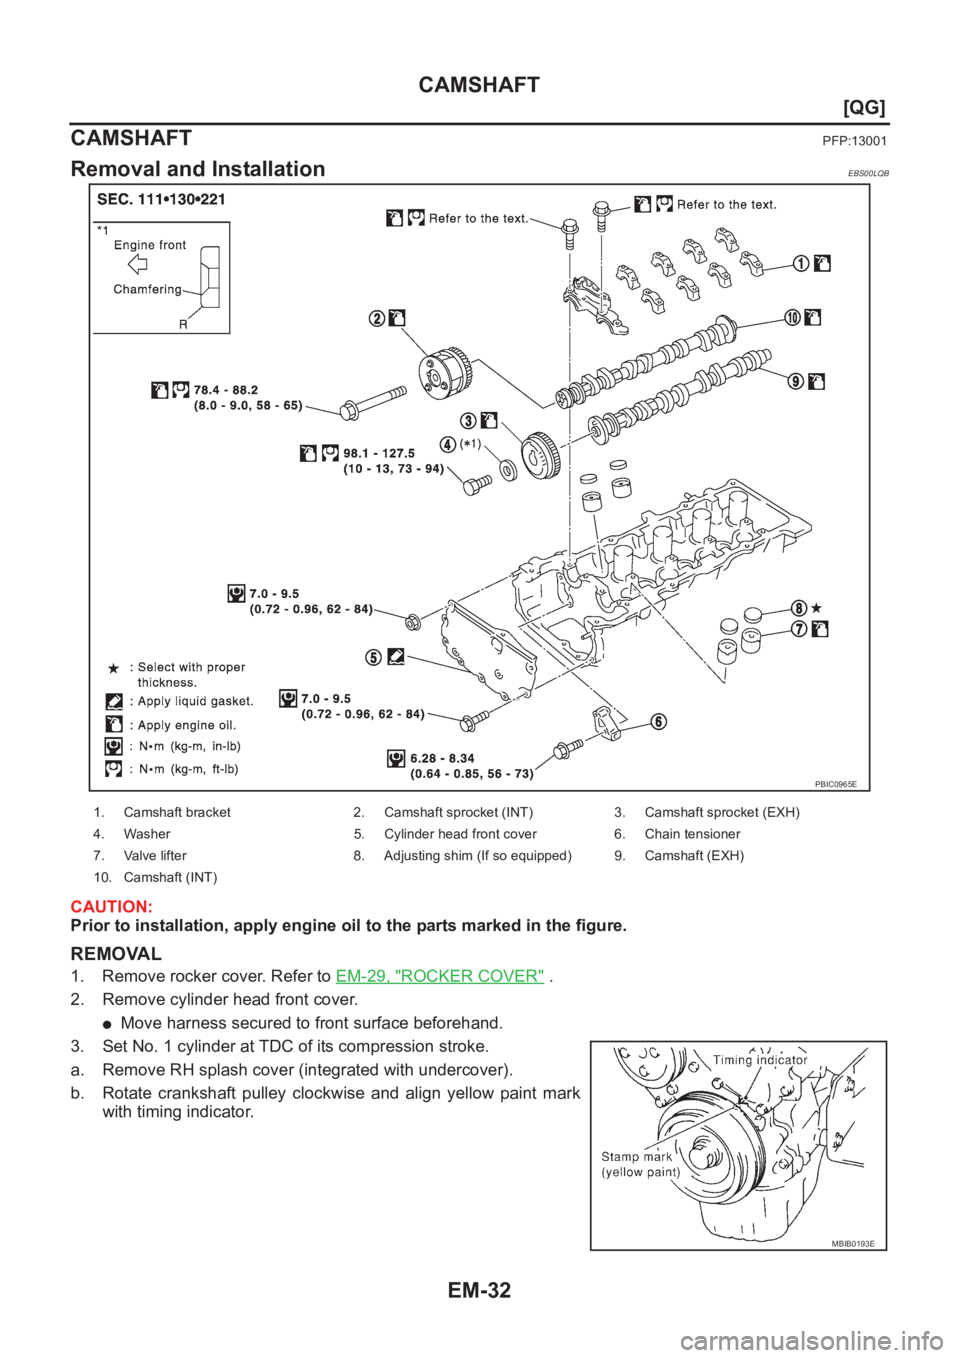 NISSAN ALMERA N16 2003  Electronic Repair Manual EM-32
[QG]
CAMSHAFT
CAMSHAFT
PFP:13001
Removal and InstallationEBS00LQB
CAUTION:
Prior to installation, apply engine oil to the parts marked in the figure.
REMOVAL
1. Remove rocker cover. Refer to EM-